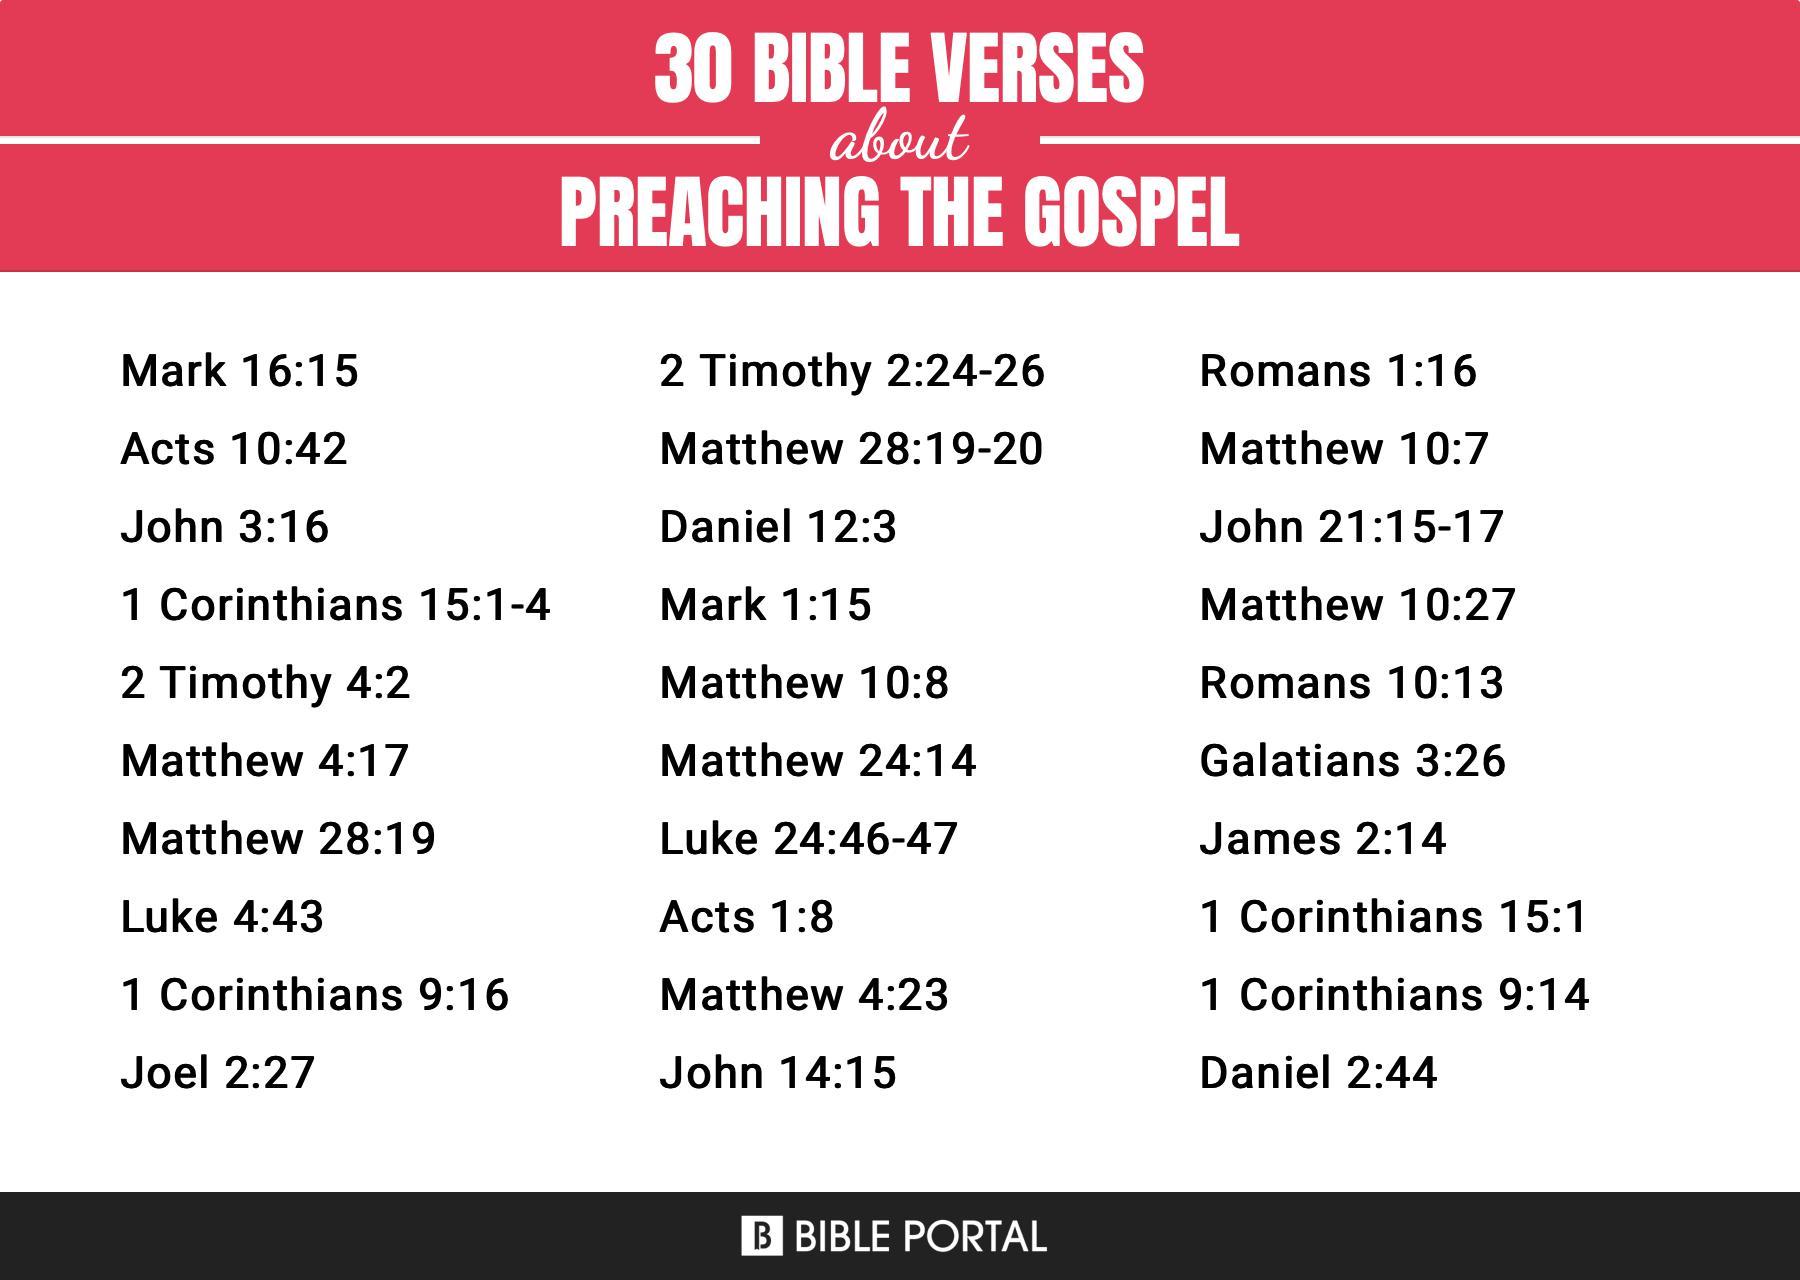 83 Bible Verses about Preaching The Gospel